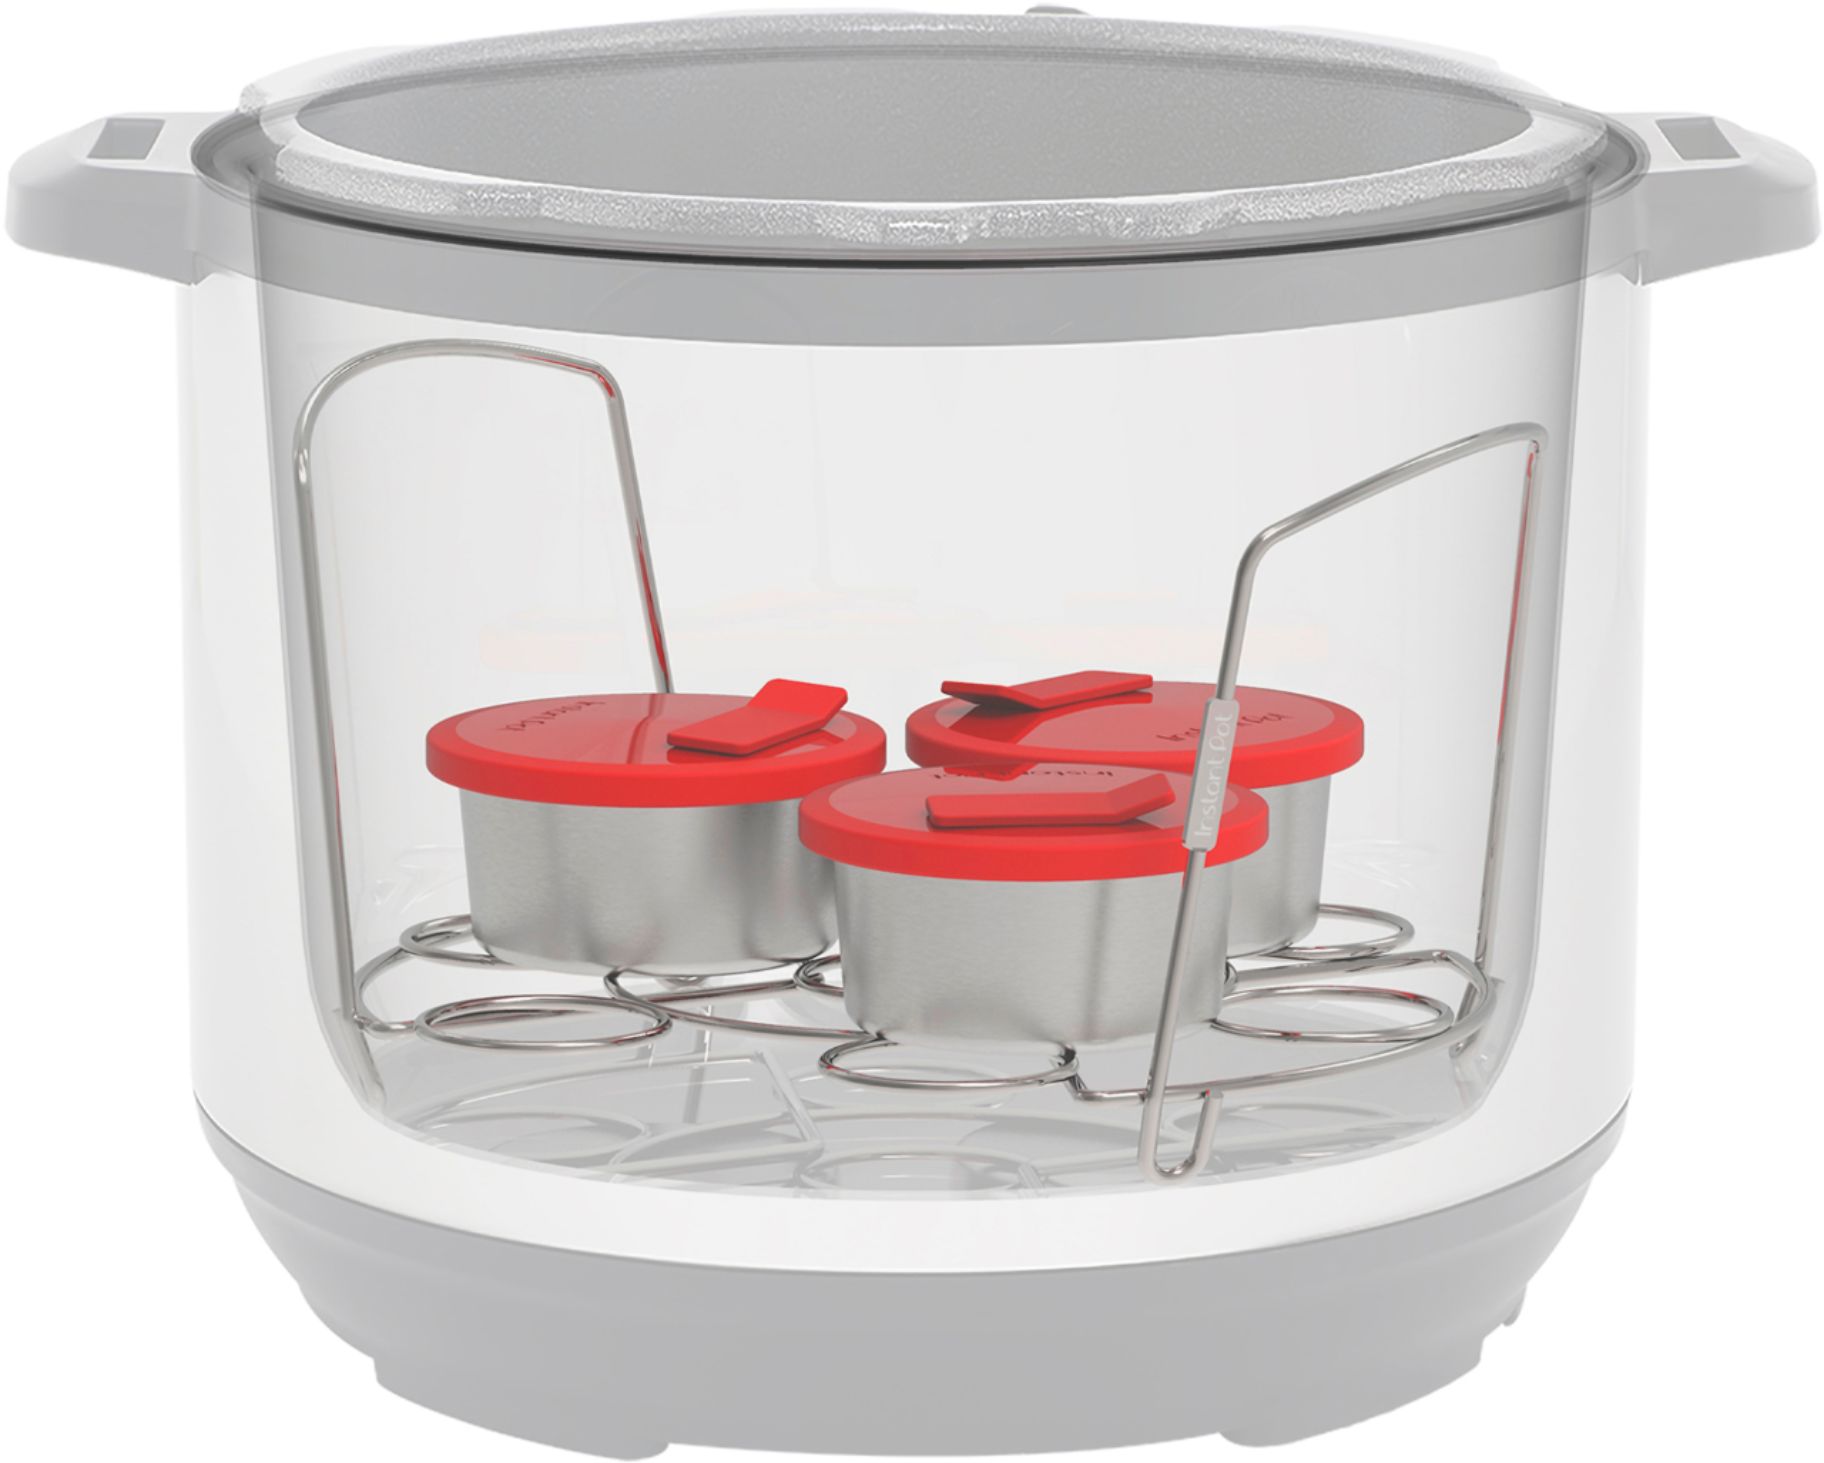 S/3 SS Small Cups w/ Red Lid, Instant Pot